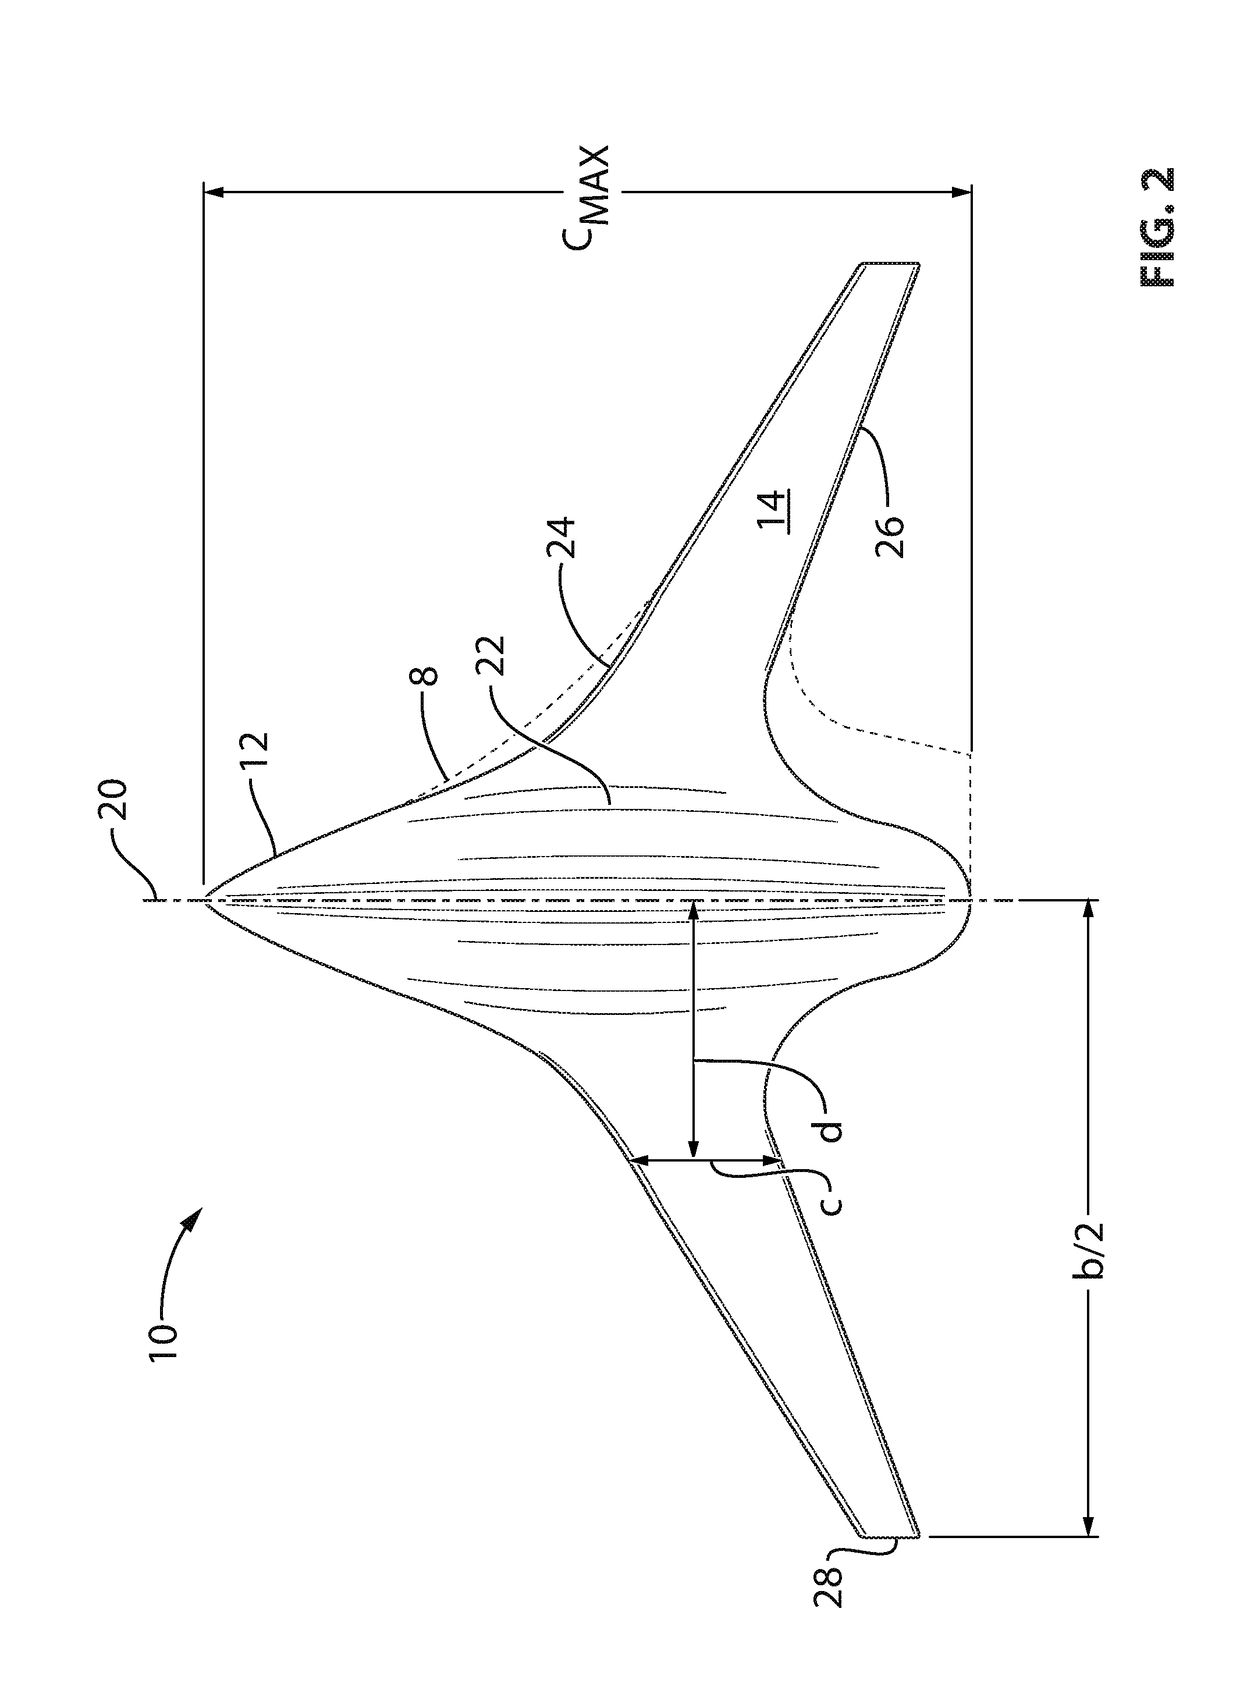 Blended wing body aircraft